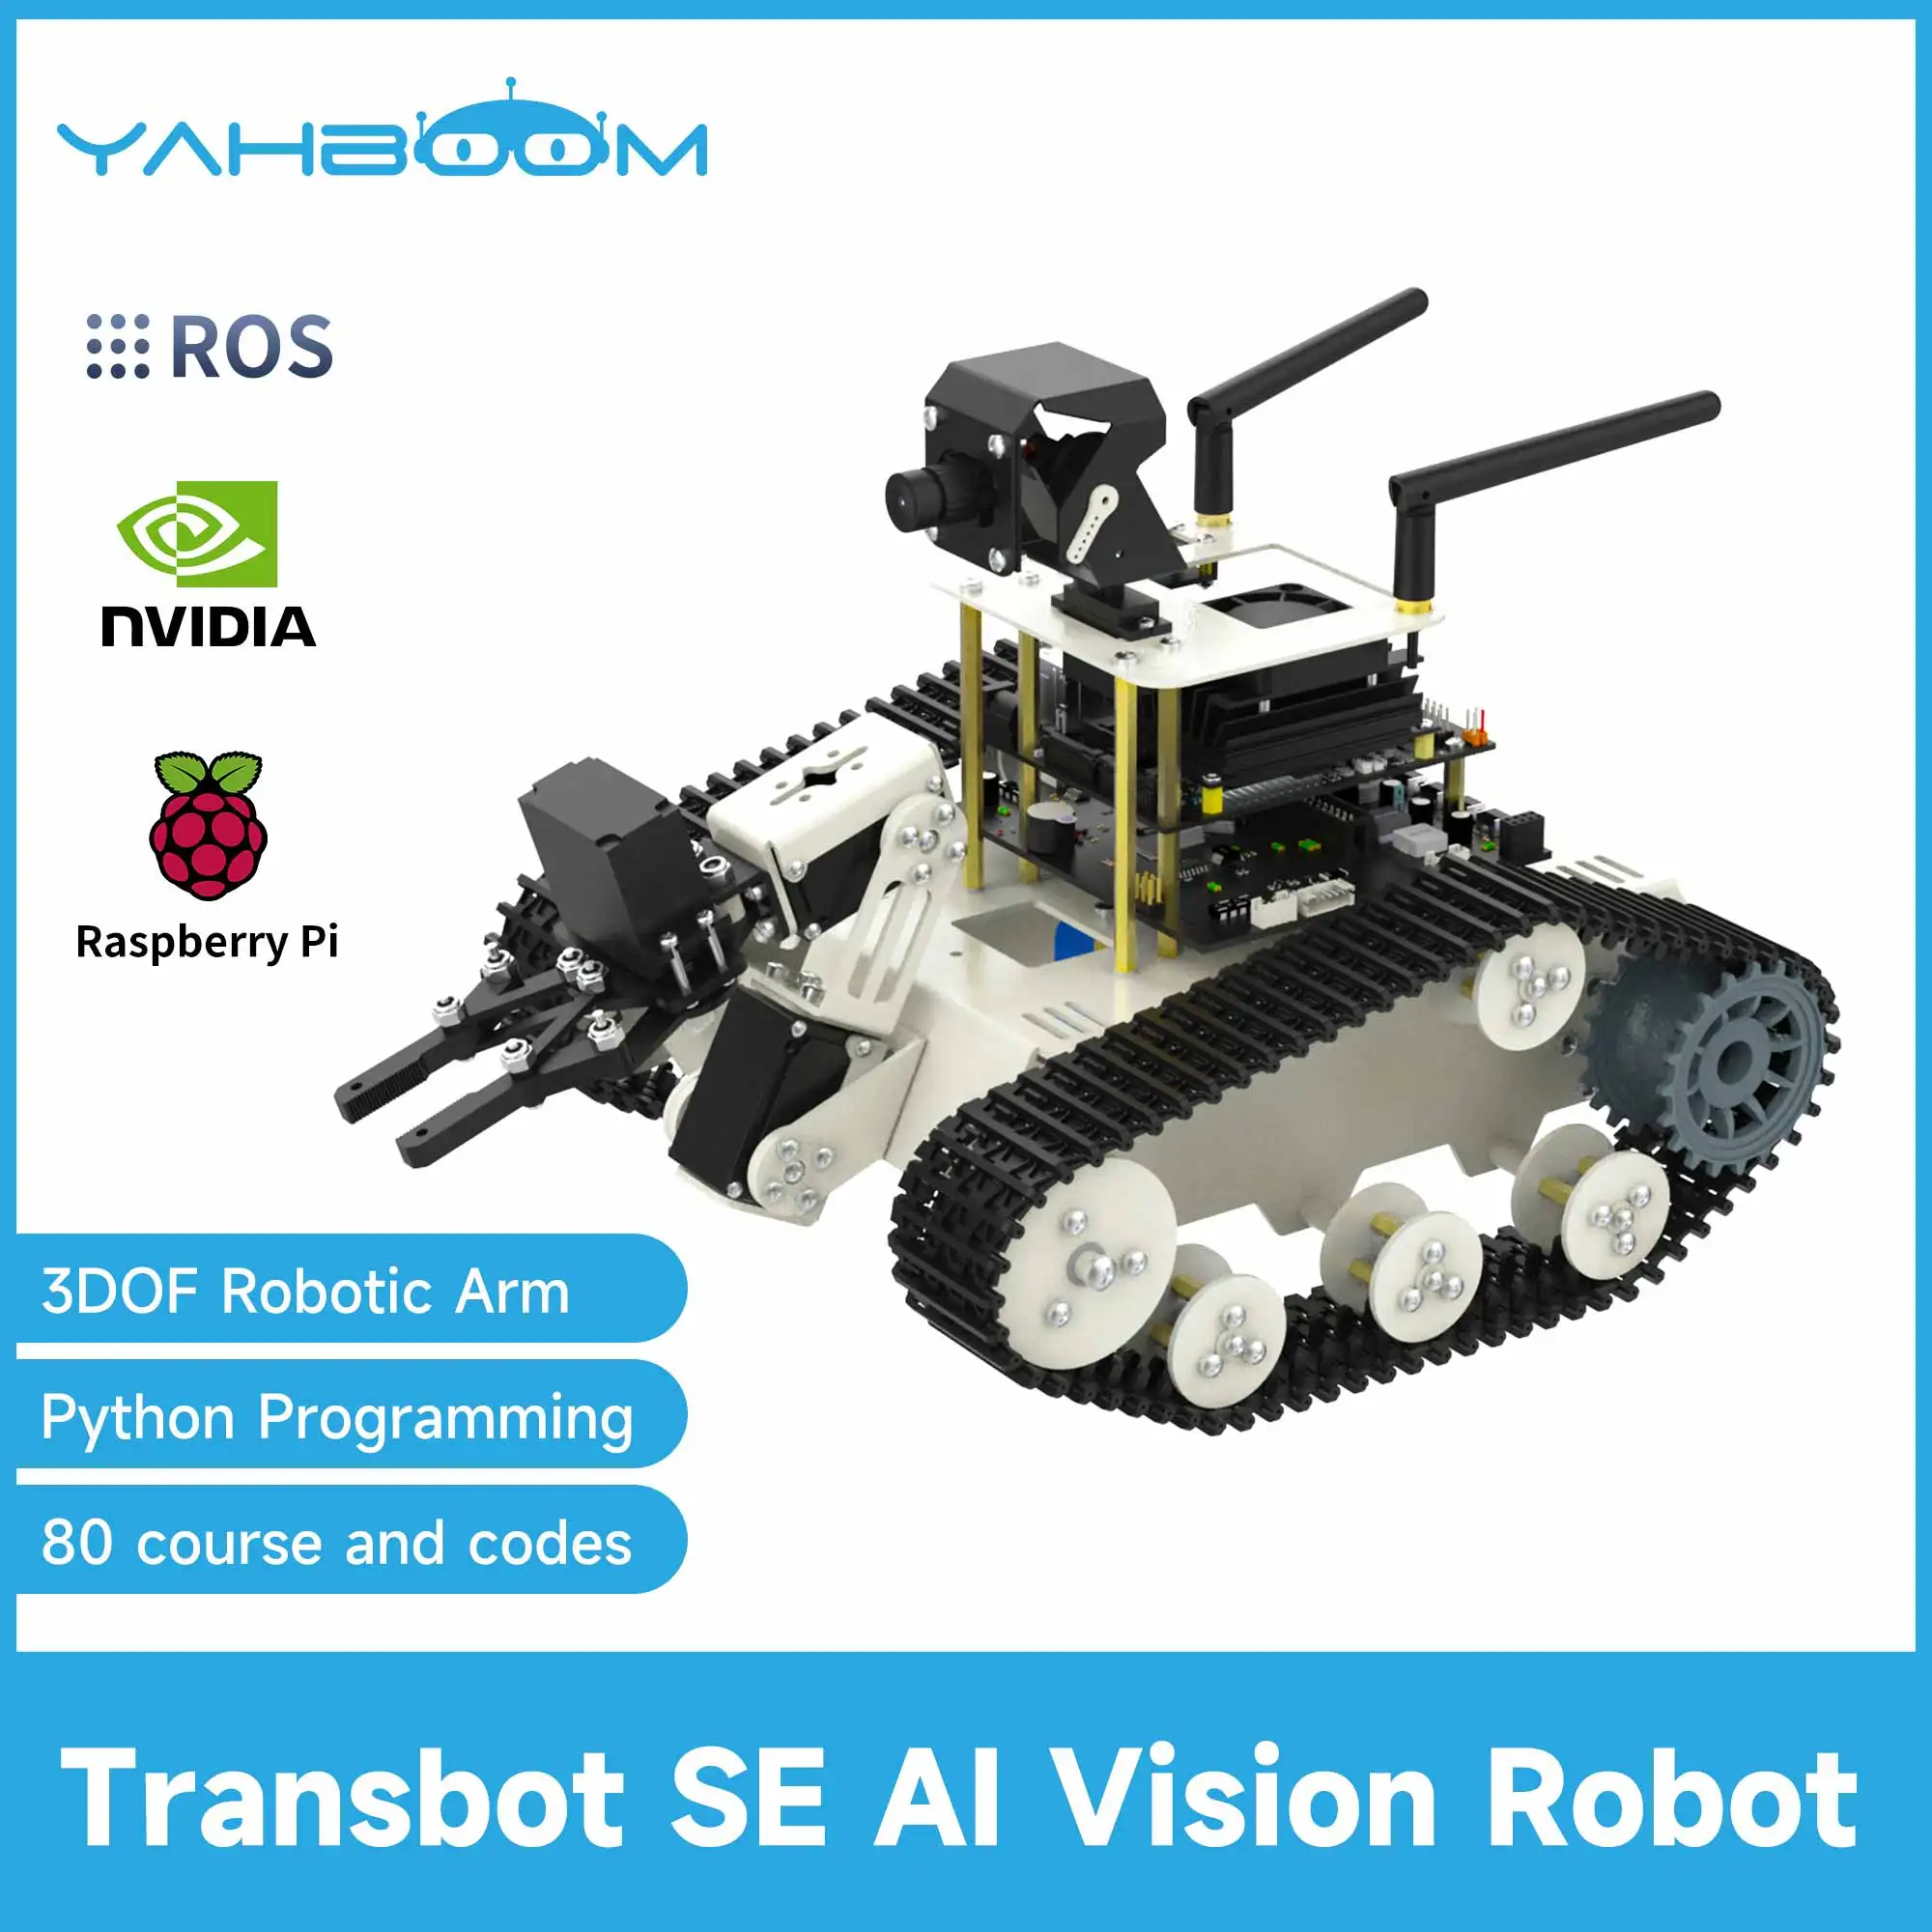 

Yahboom Transbot SE ROS Robot AI Vision Tank Car with 2DOF Camera PTZ Can MoveIt Simulation for Jetson NANO B01 and Raspberry Pi